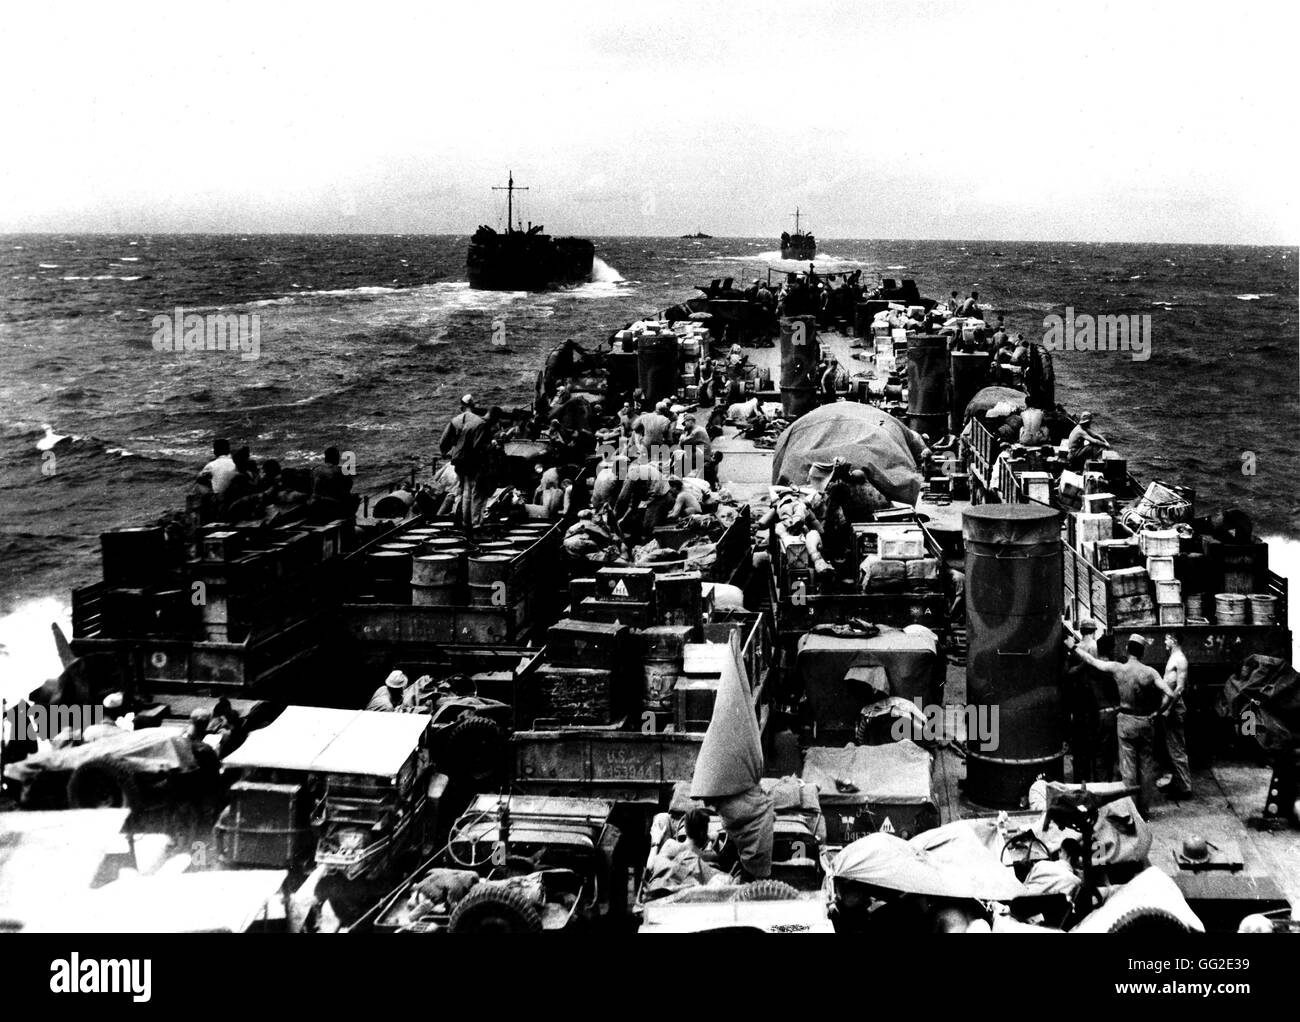 The Normandy landings: 'Marines' with their equipment on a LST's deck (Landing Ship Tank) 1944 France, Second World War war National archives, Washington Stock Photo